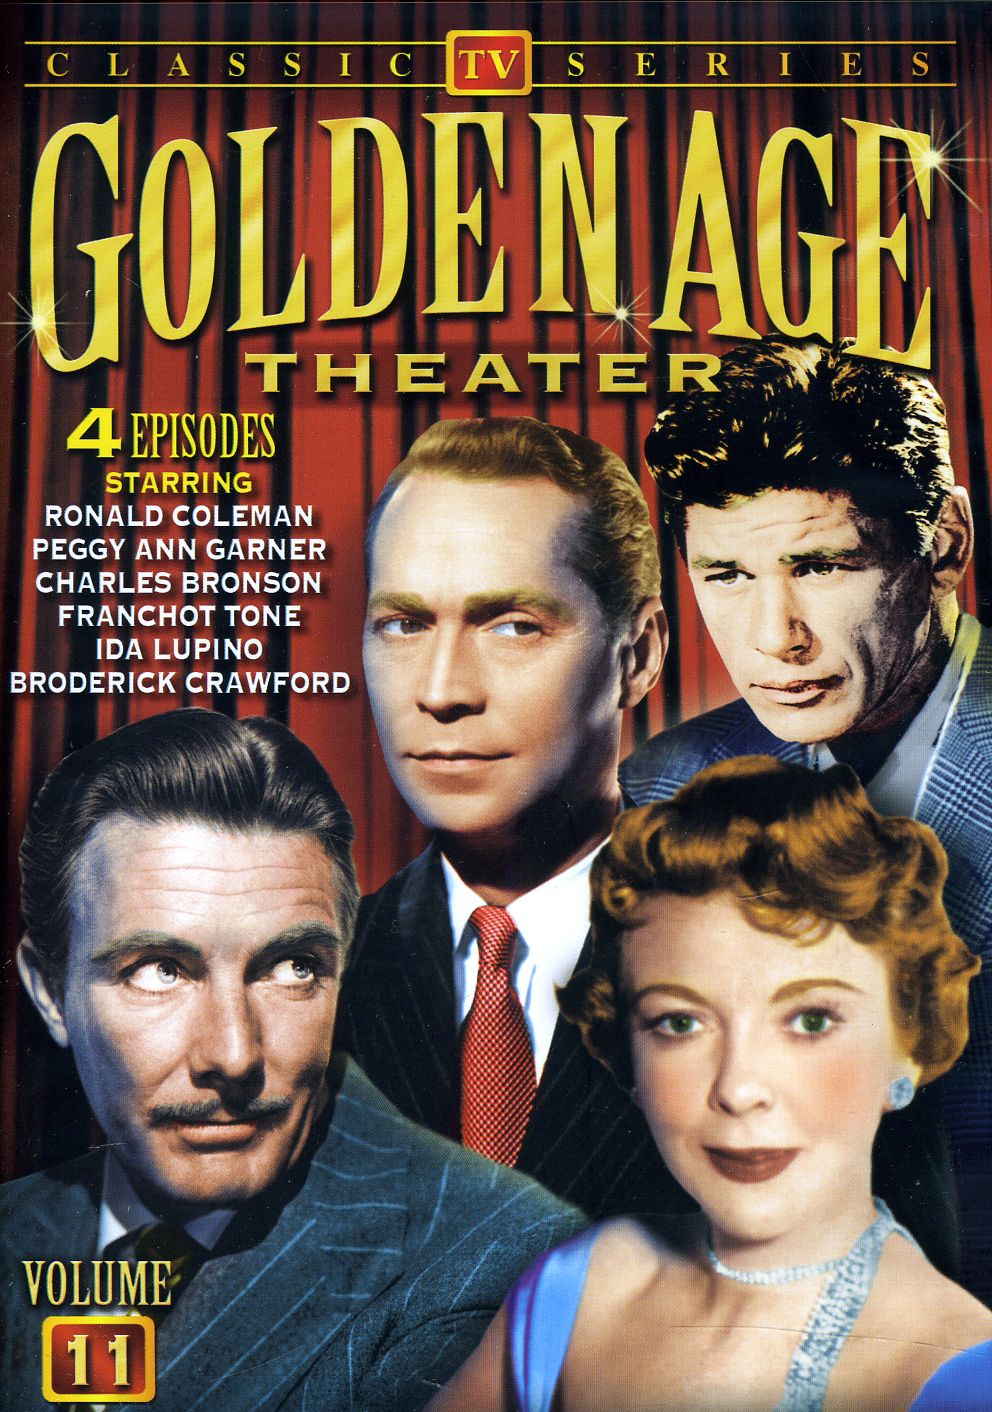 GOLDEN AGE THEATER 11 / (B&W)